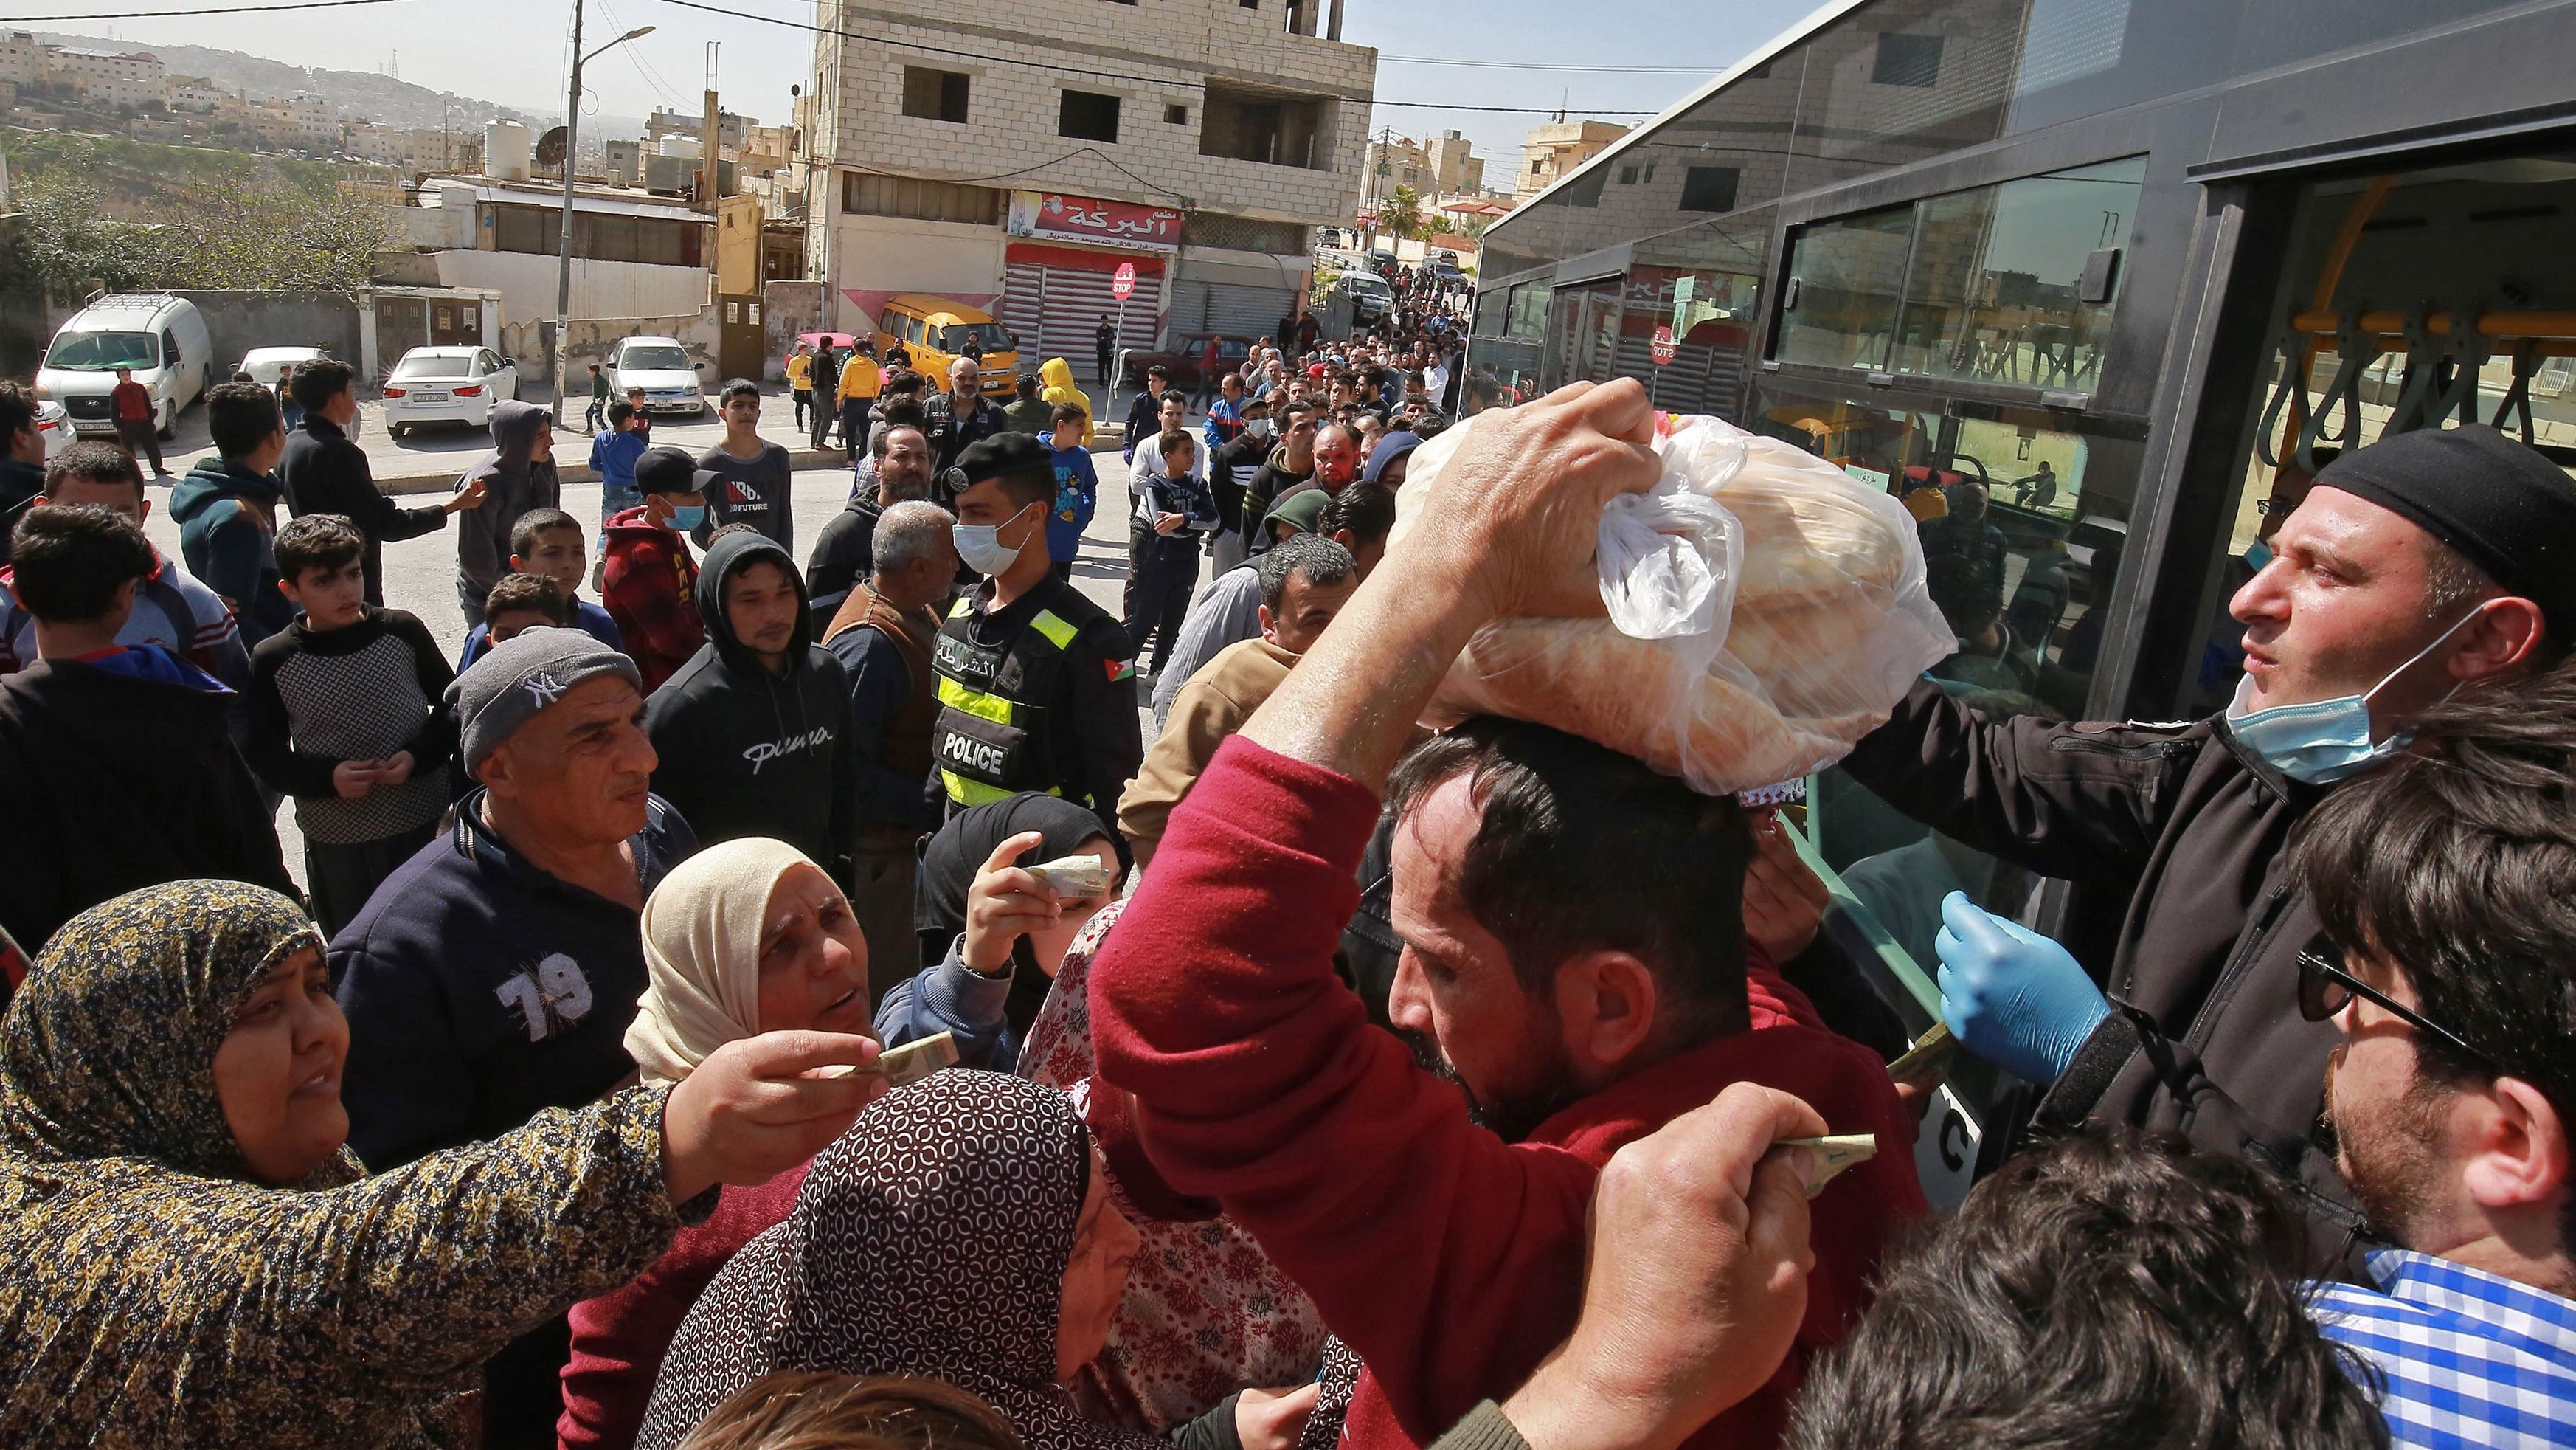 People queue to buy subsidised bread from a municipal bus in the Marka suburb of Amman on Tuesday.